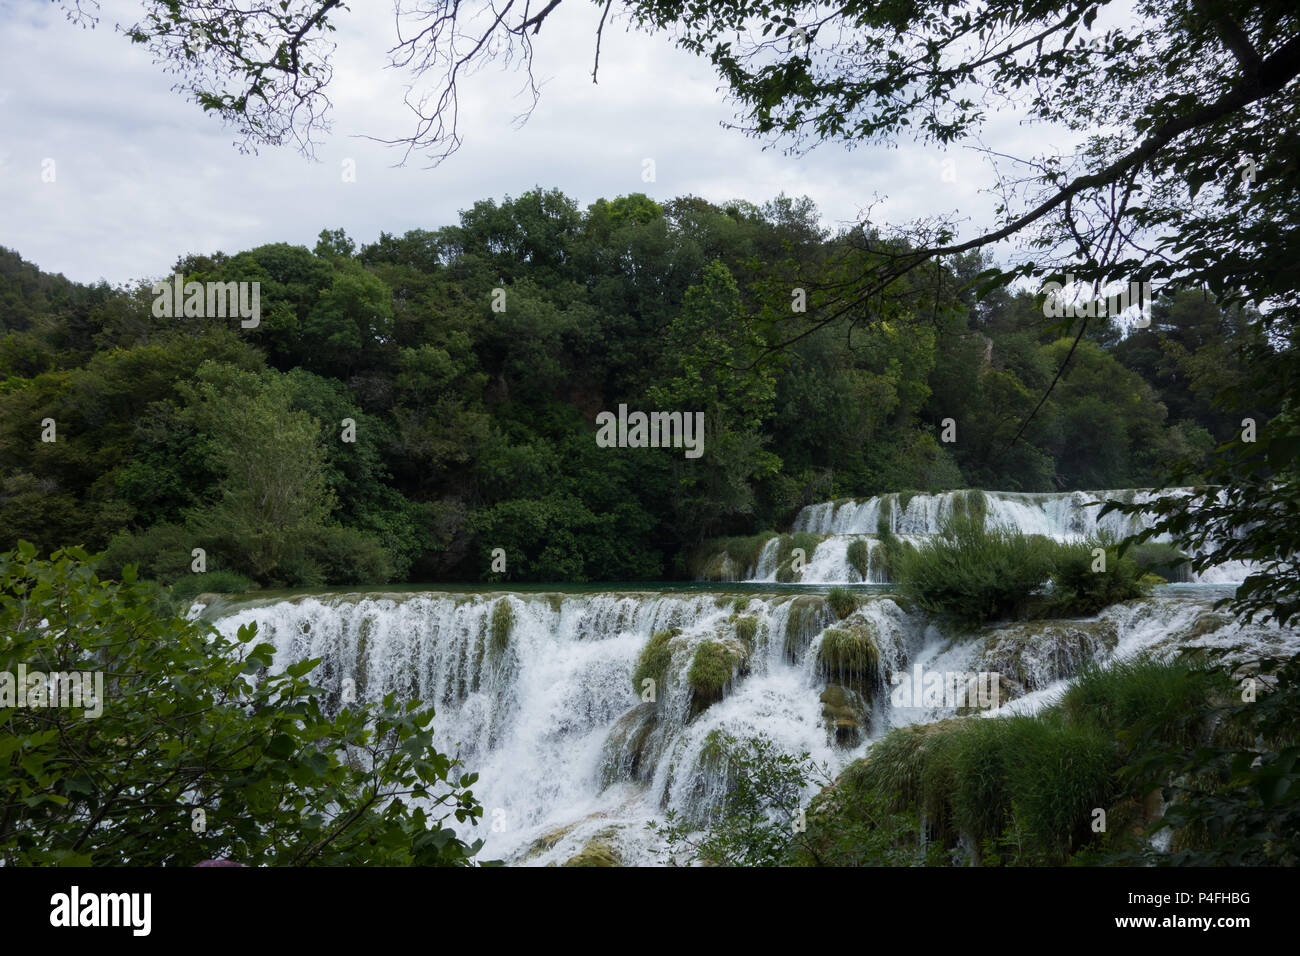 A view of one of many waterfalls in Krka national park, Croatia Stock Photo